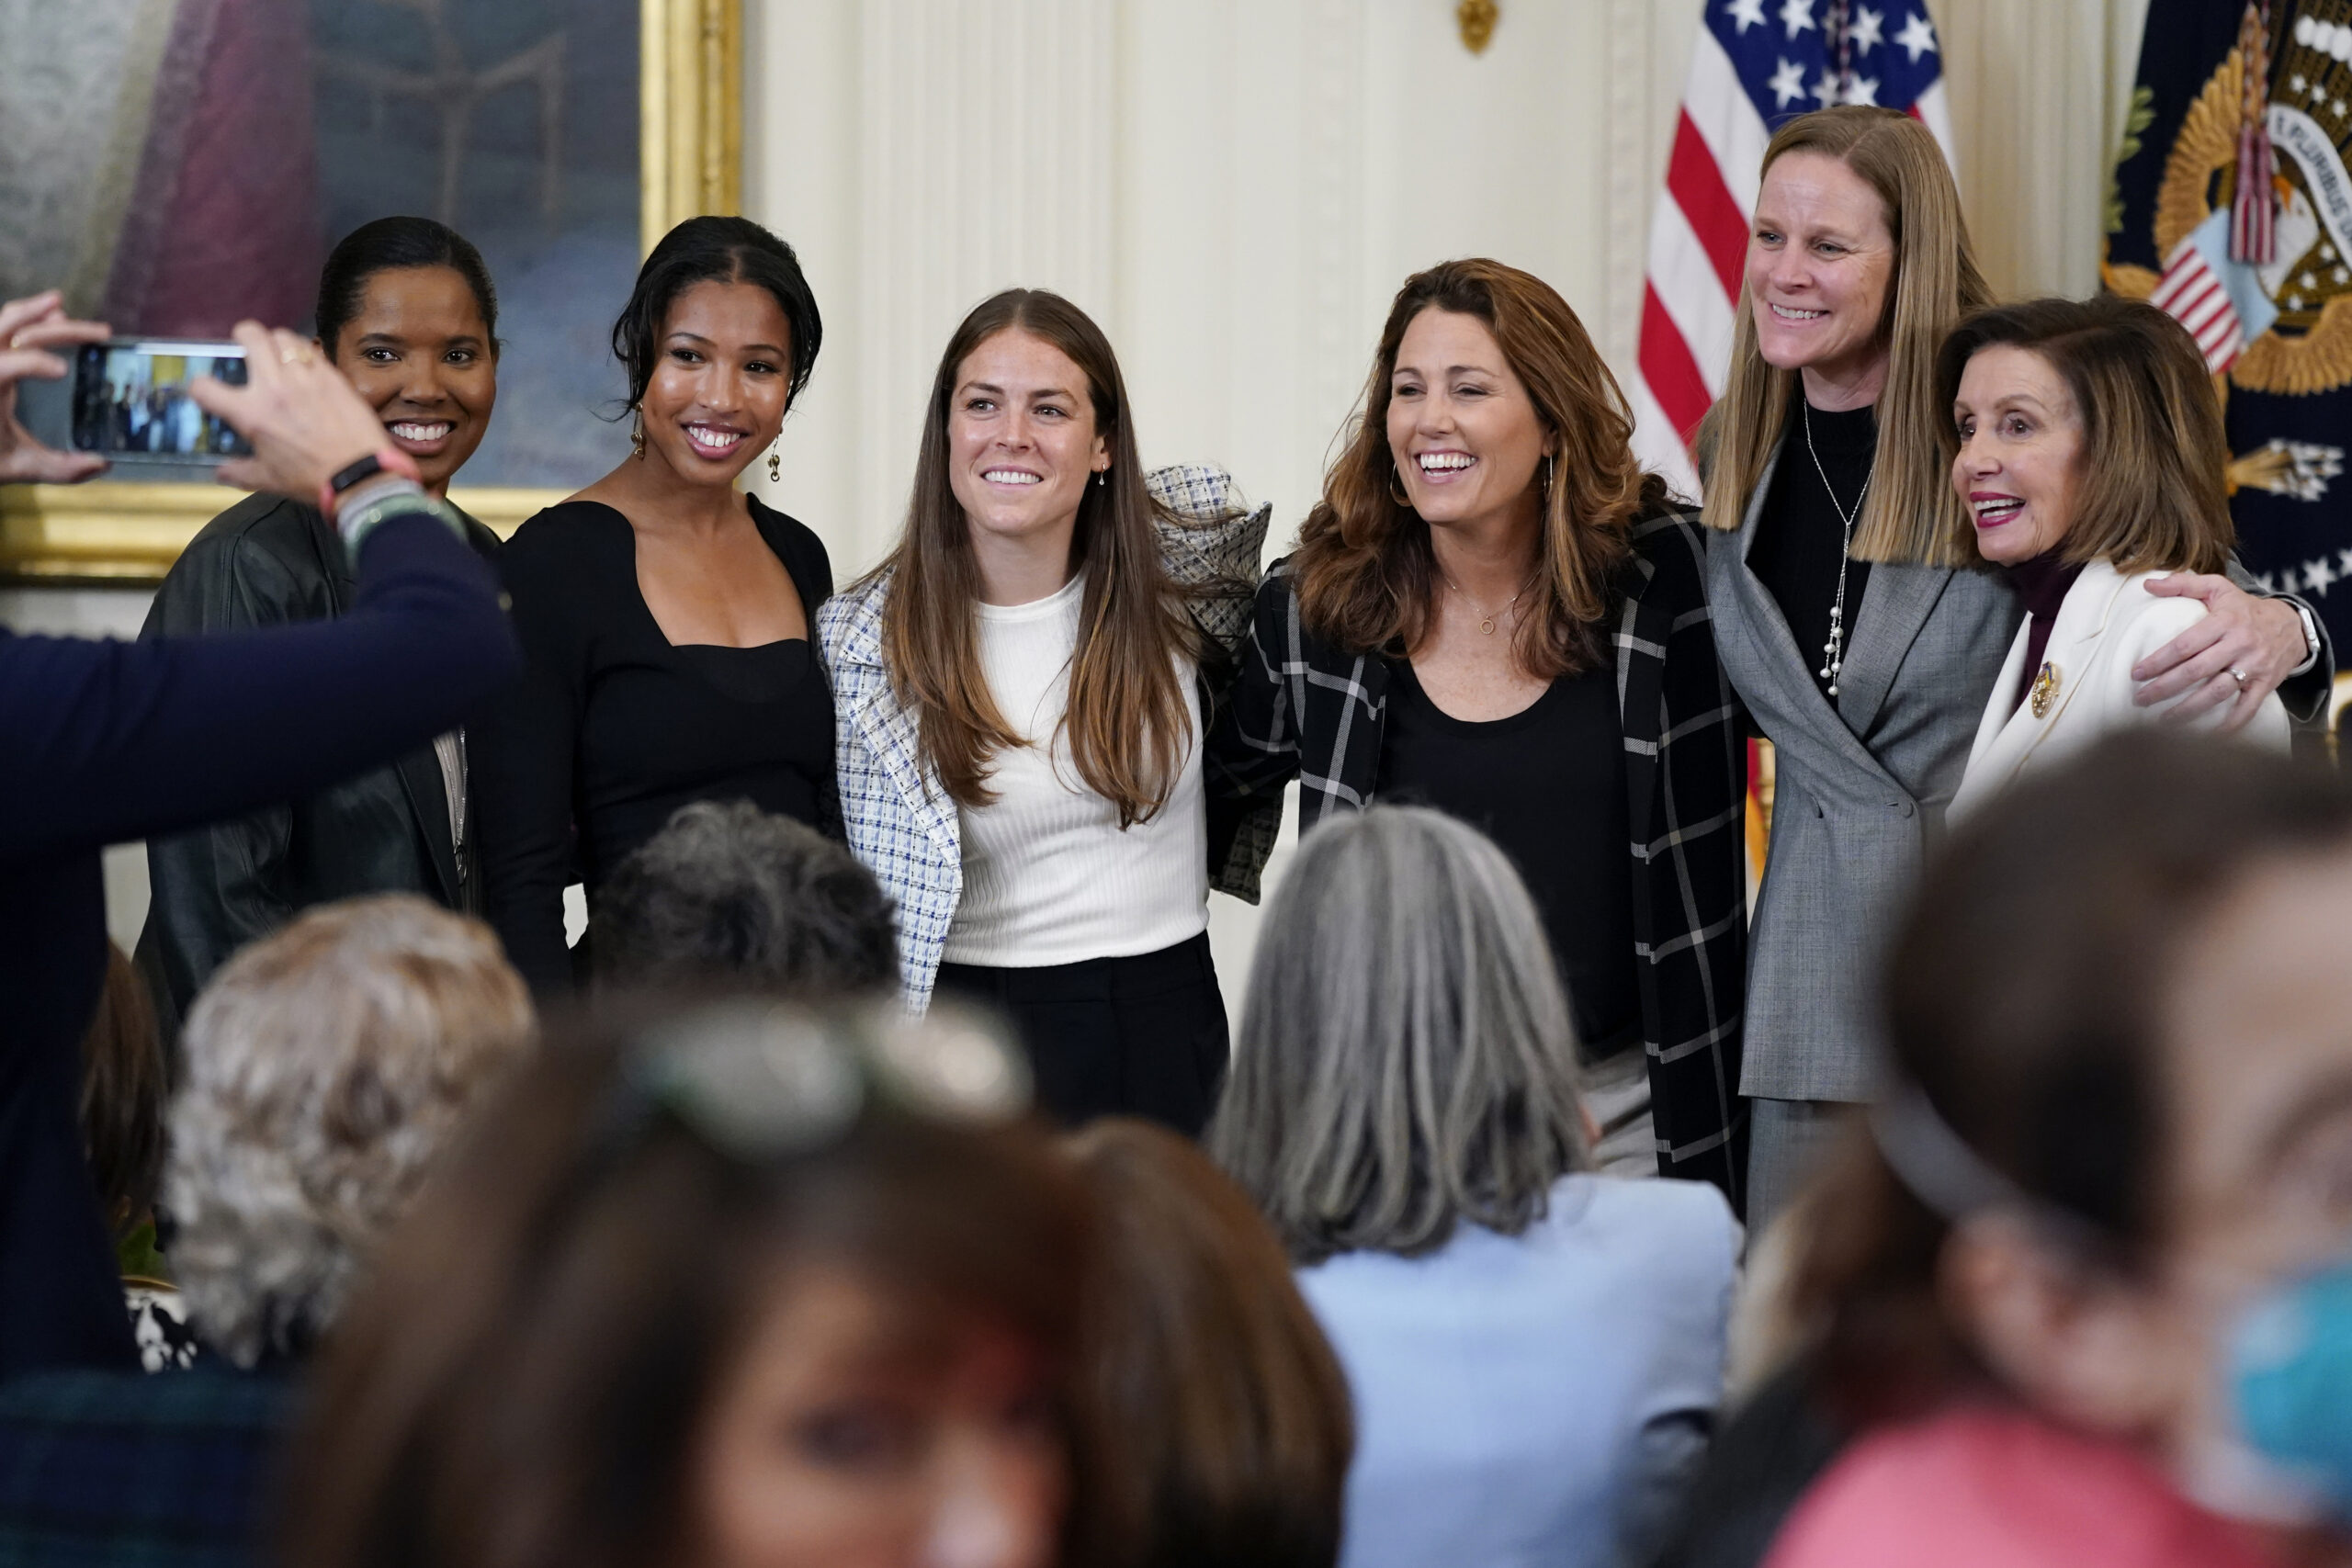 FILE - Former members and members of the U.S. Women's National soccer team, from left, Briana Scurry, Margaret 'Midge' Purce, Kelley O'Hara, Julie Foudy, and Cindy Parlow Cone, President of U.S. Soccer, pose for a photo with House Speaker Nancy Pelosi of Calif., before an event to celebrate Equal Pay Day and Women's History Month in the East Room of the White House, Tuesday, March 15, 2022, in Washington. The U.S. Soccer Federation reached milestone agreements to pay its men's and women's teams equally, making the American national governing body the first in the sport to promise both sexes matching money. (AP Photo/Patrick Semansky, File)